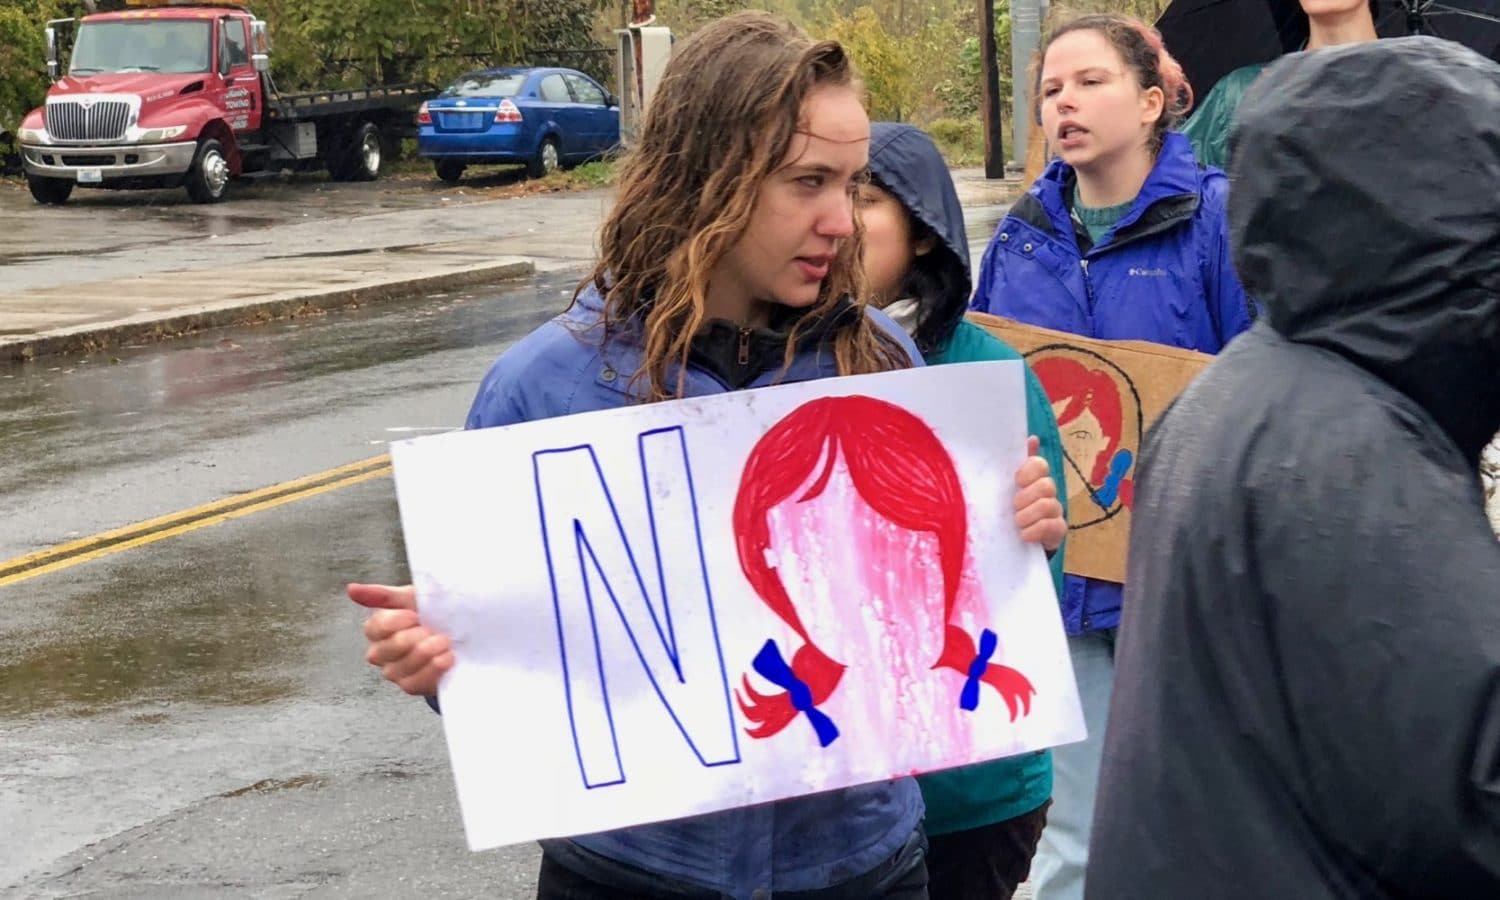 Rhode Island: Advocates for the Fair Food Program want you to Boycott Wendy’s and stop the sexual exploitation of vulnerable workers